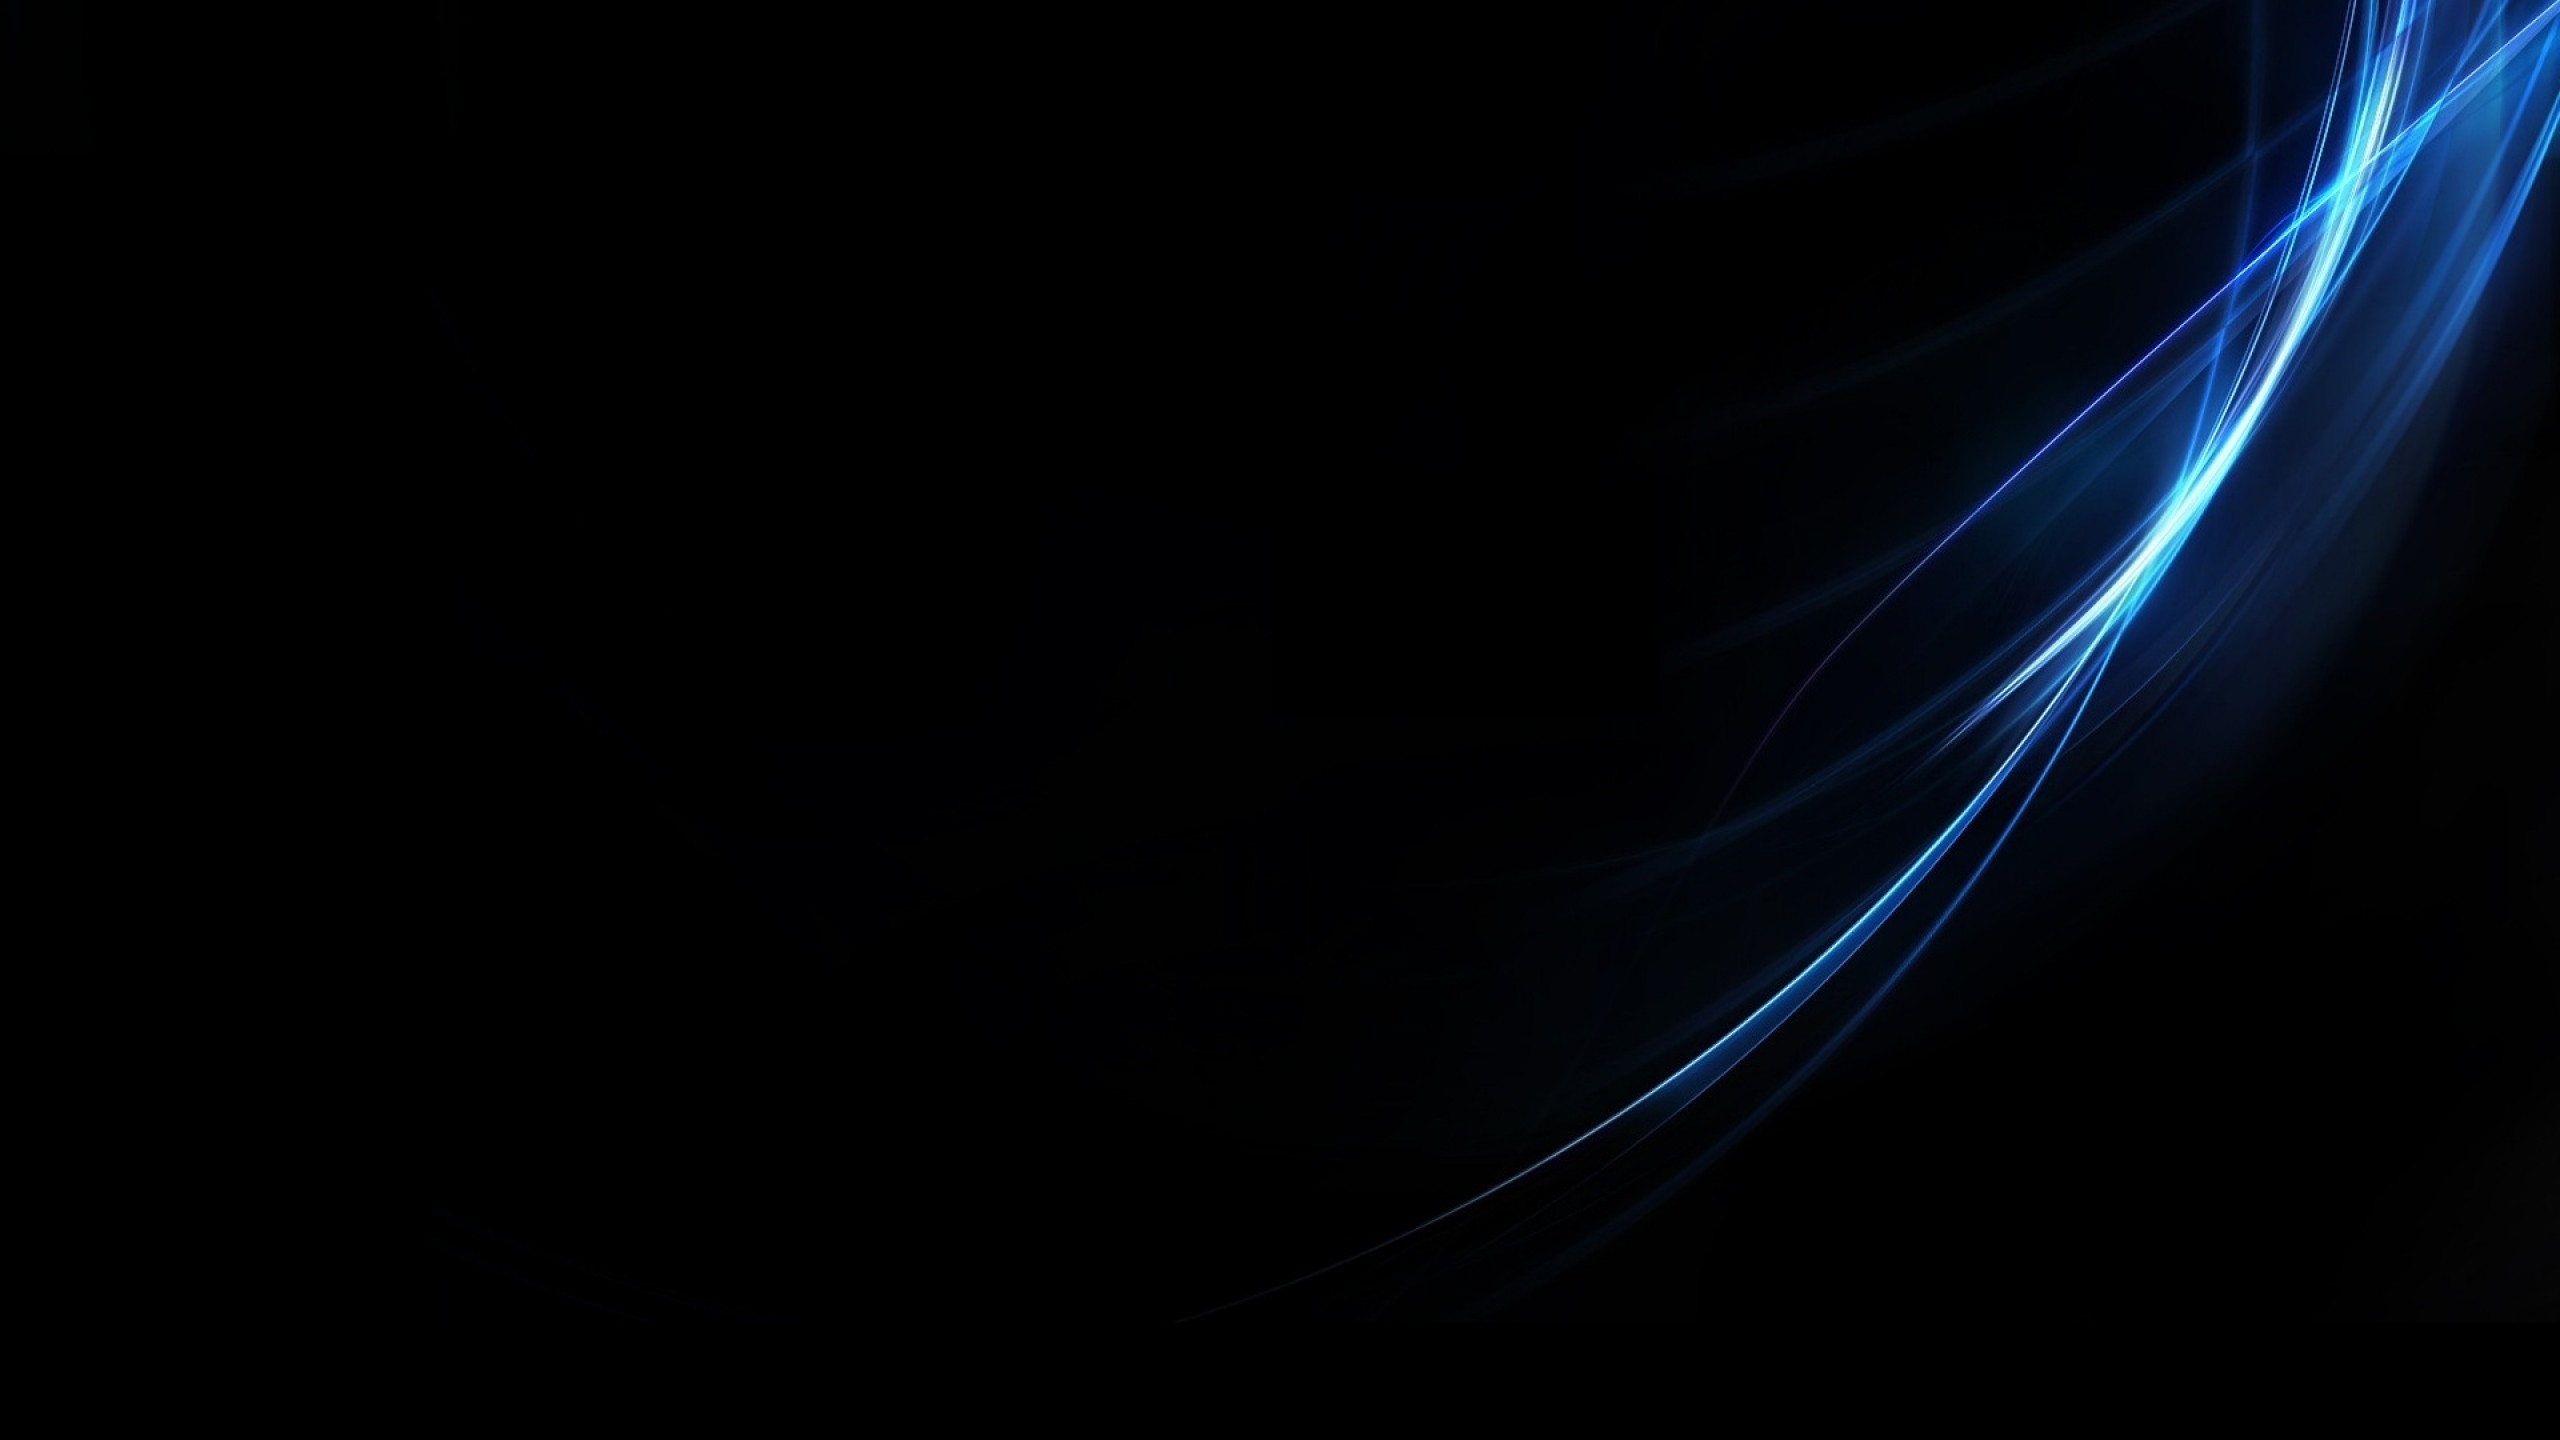 2560x1440  Black Abstract Windows 8.1 Wallpapers | All for Windows 10 Free  HTML .